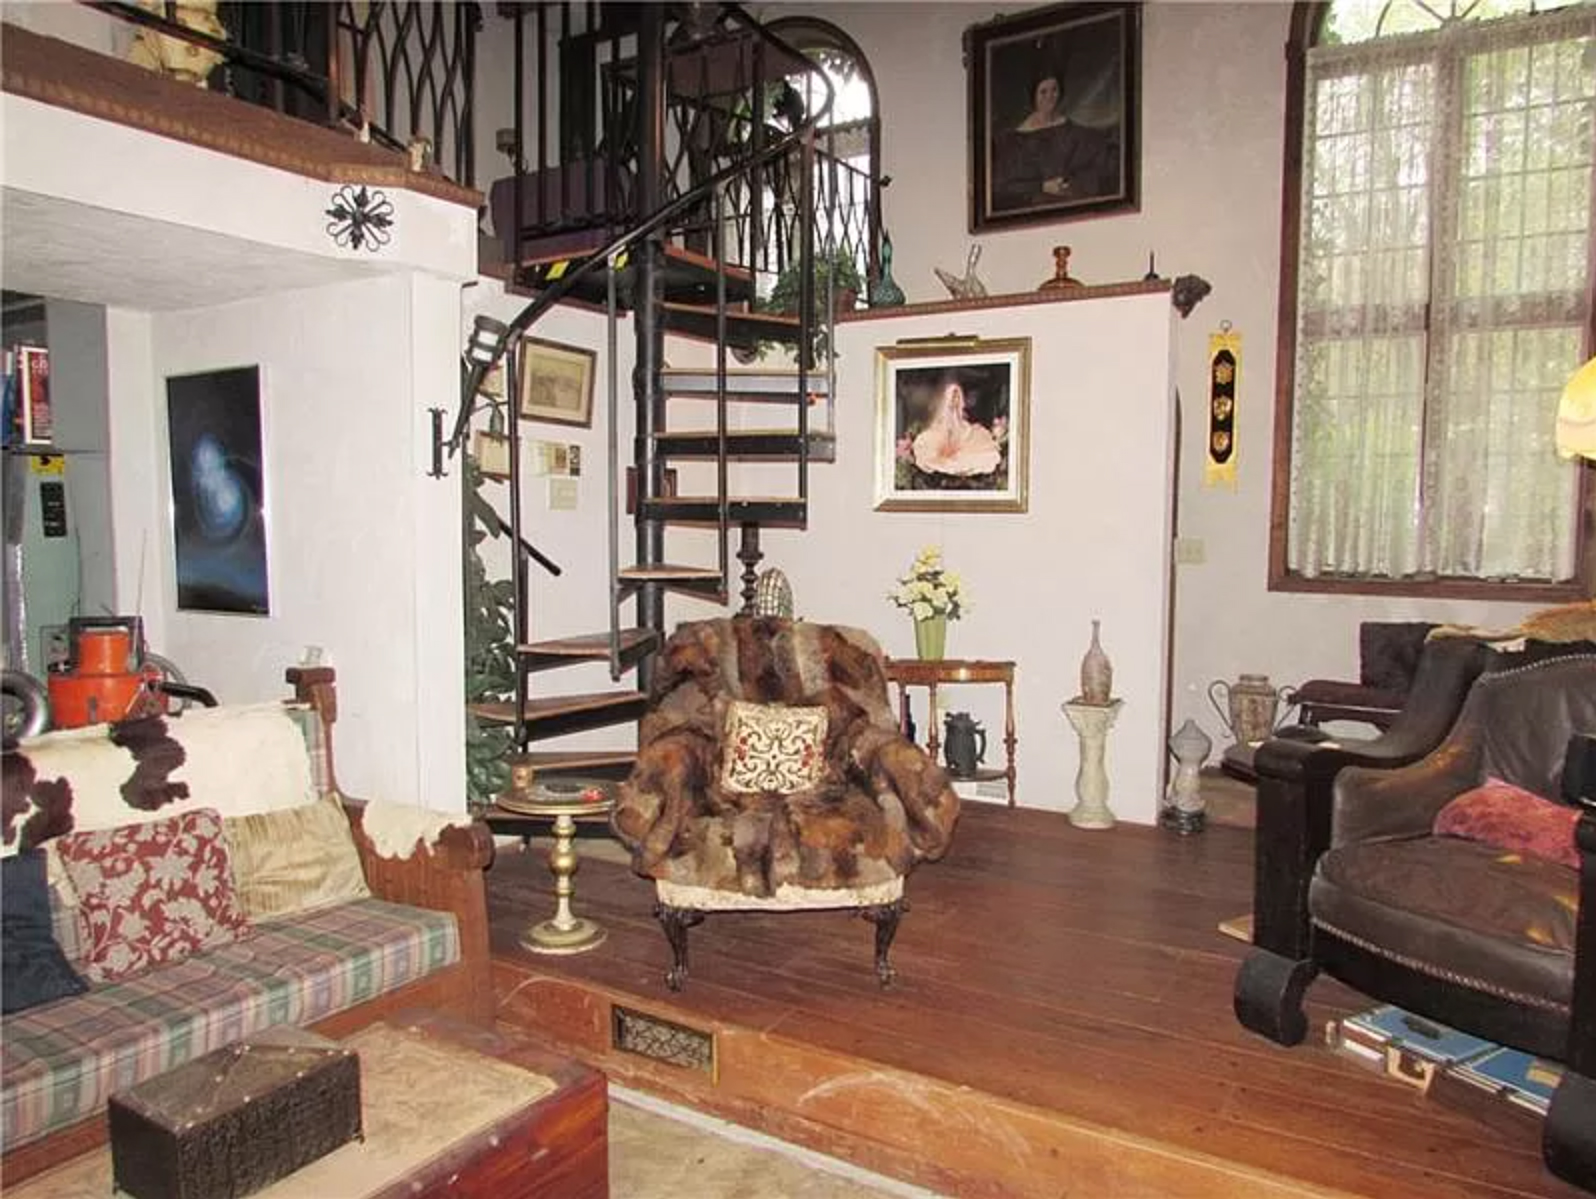 house with weird leather chair and spiral staircase